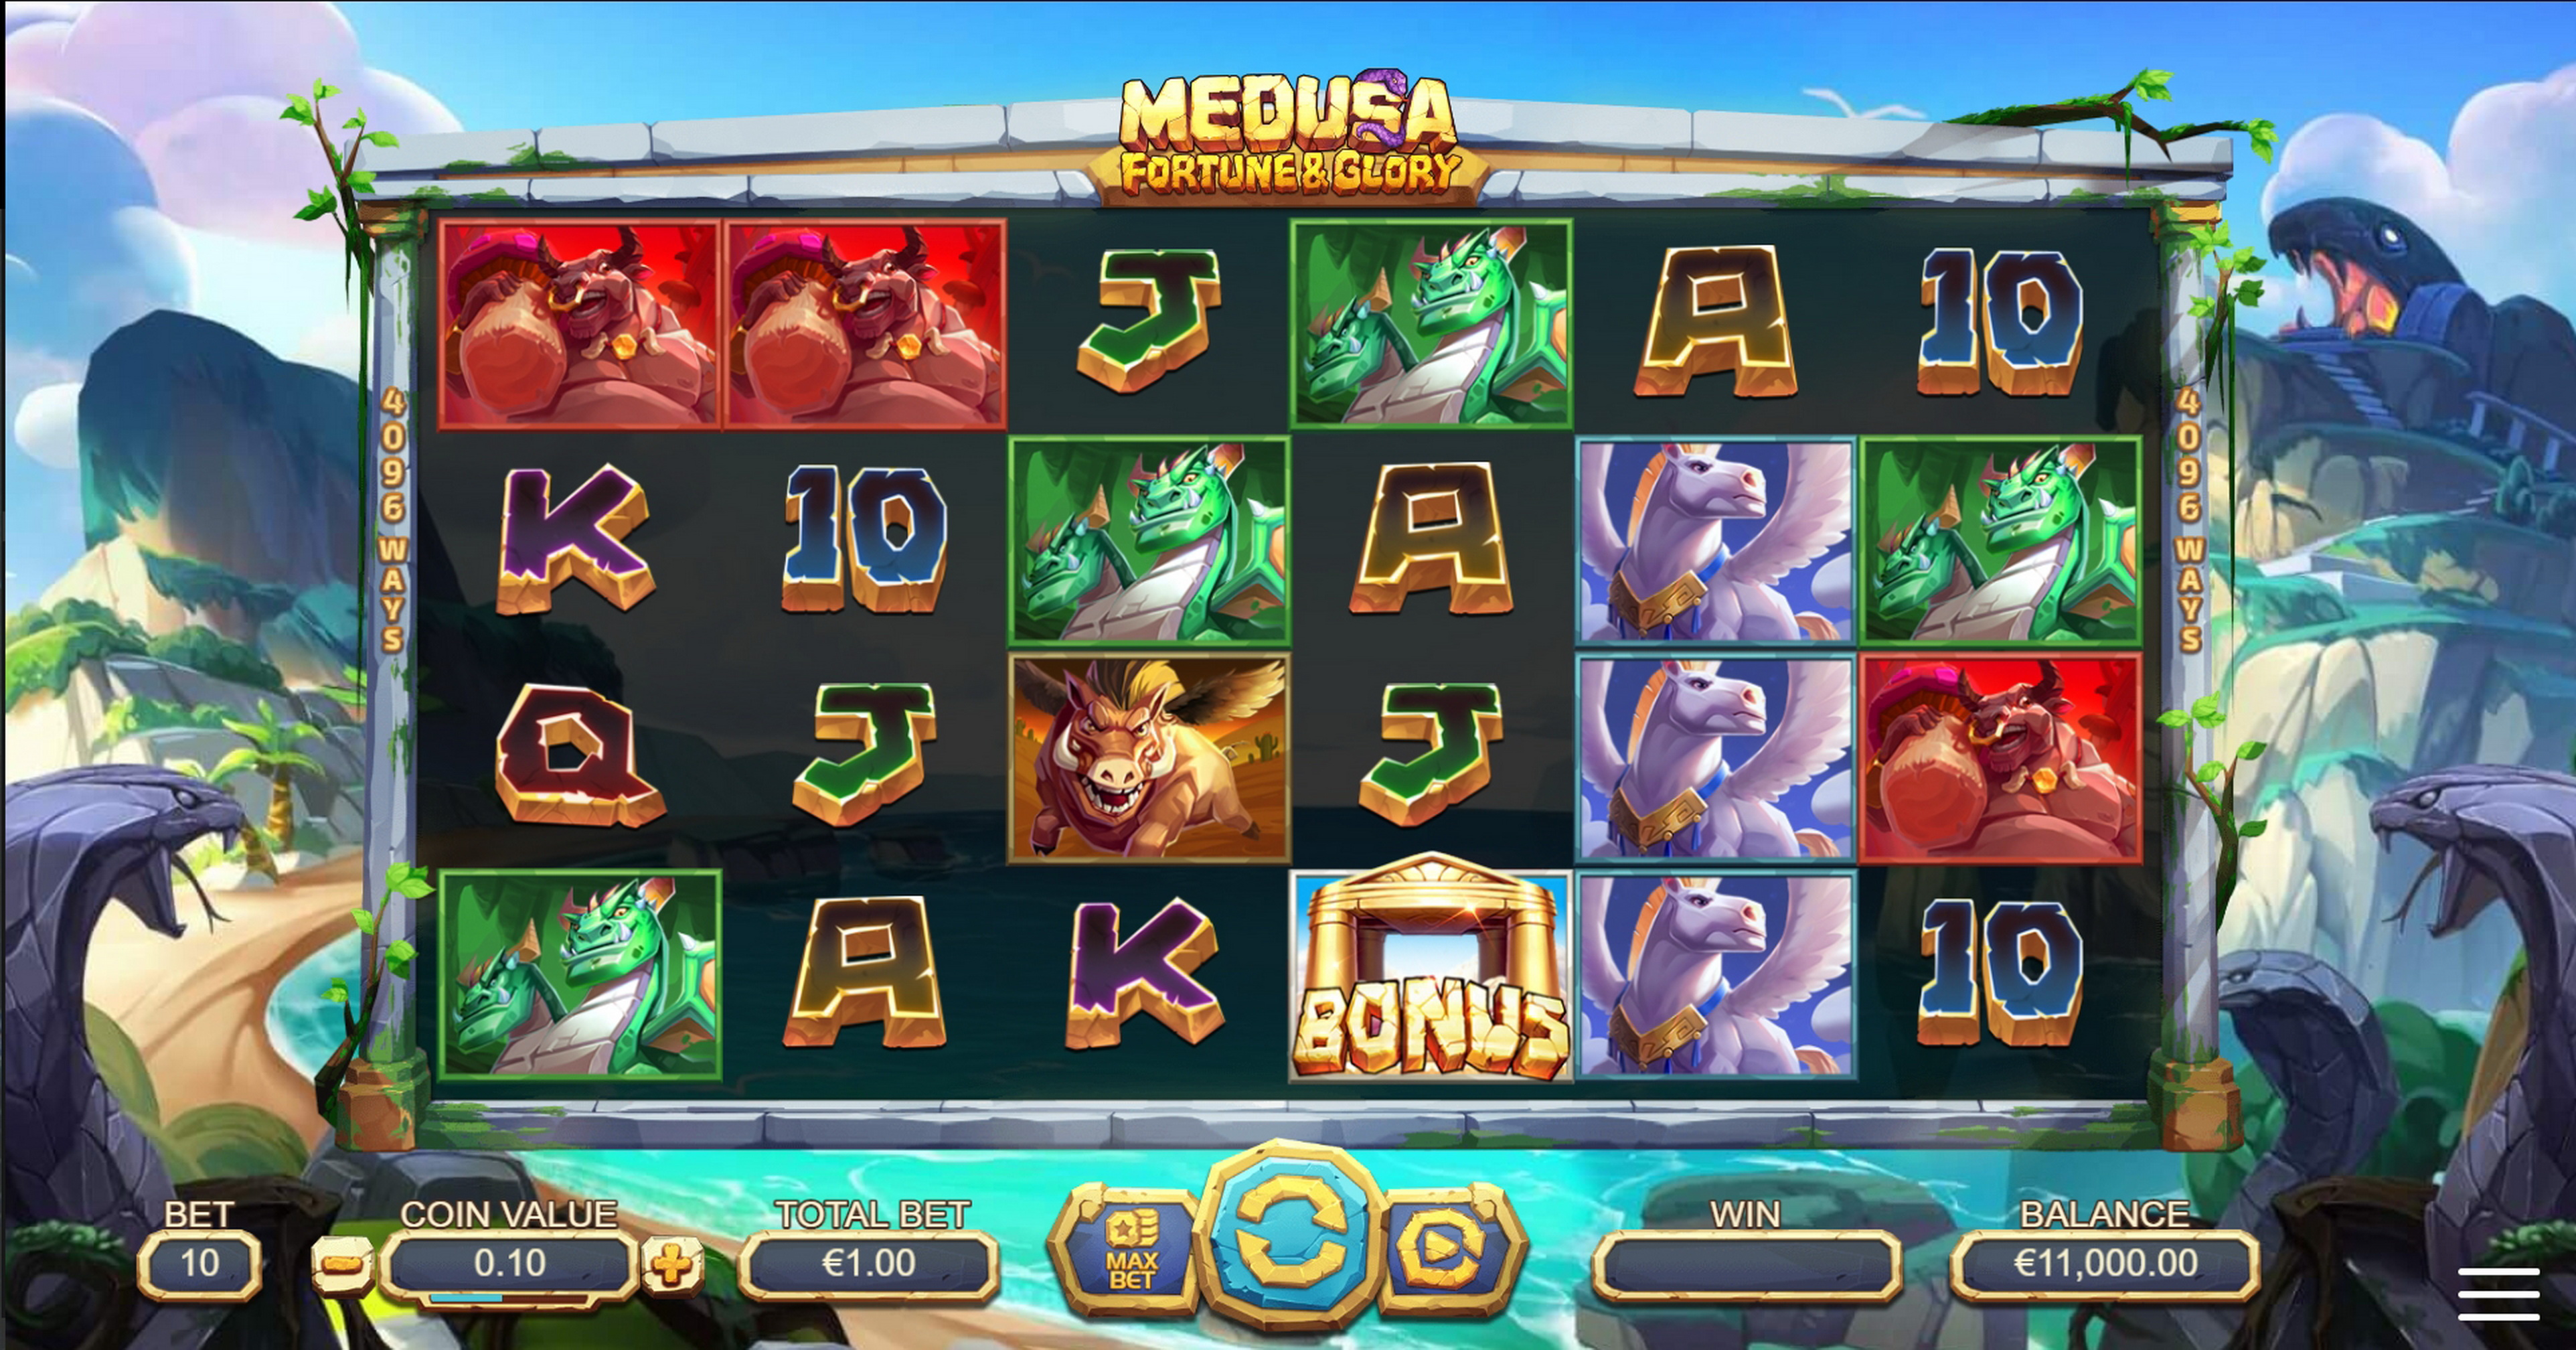 Reels in Medusa: Fortune and Glory Slot Game by Dreamtech Gaming